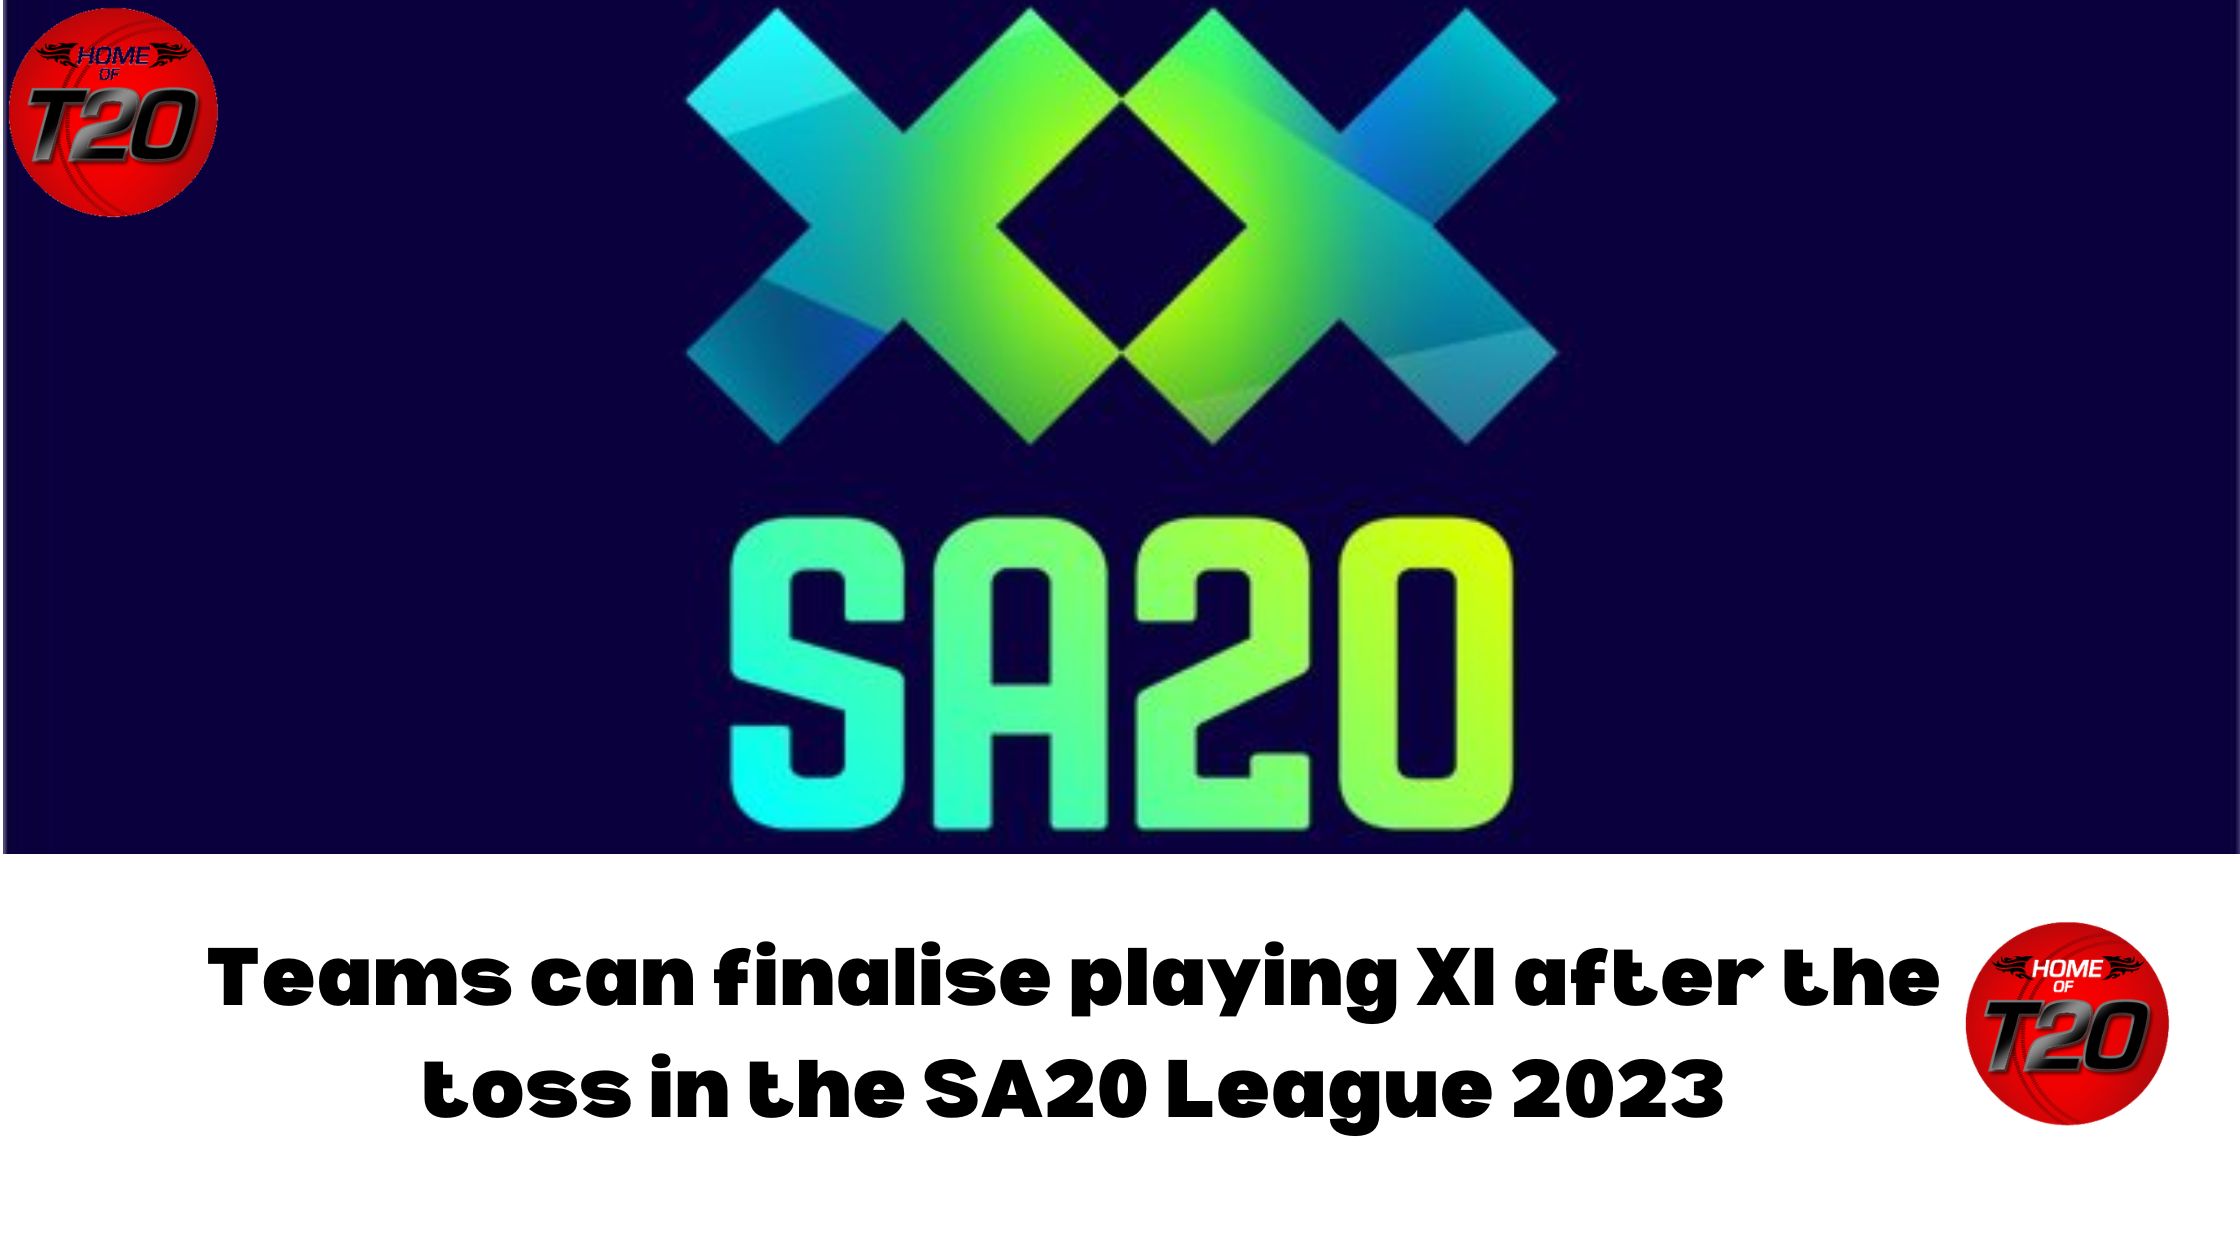 Teams can finalise playing XI after the toss in the SA20 League 2023 